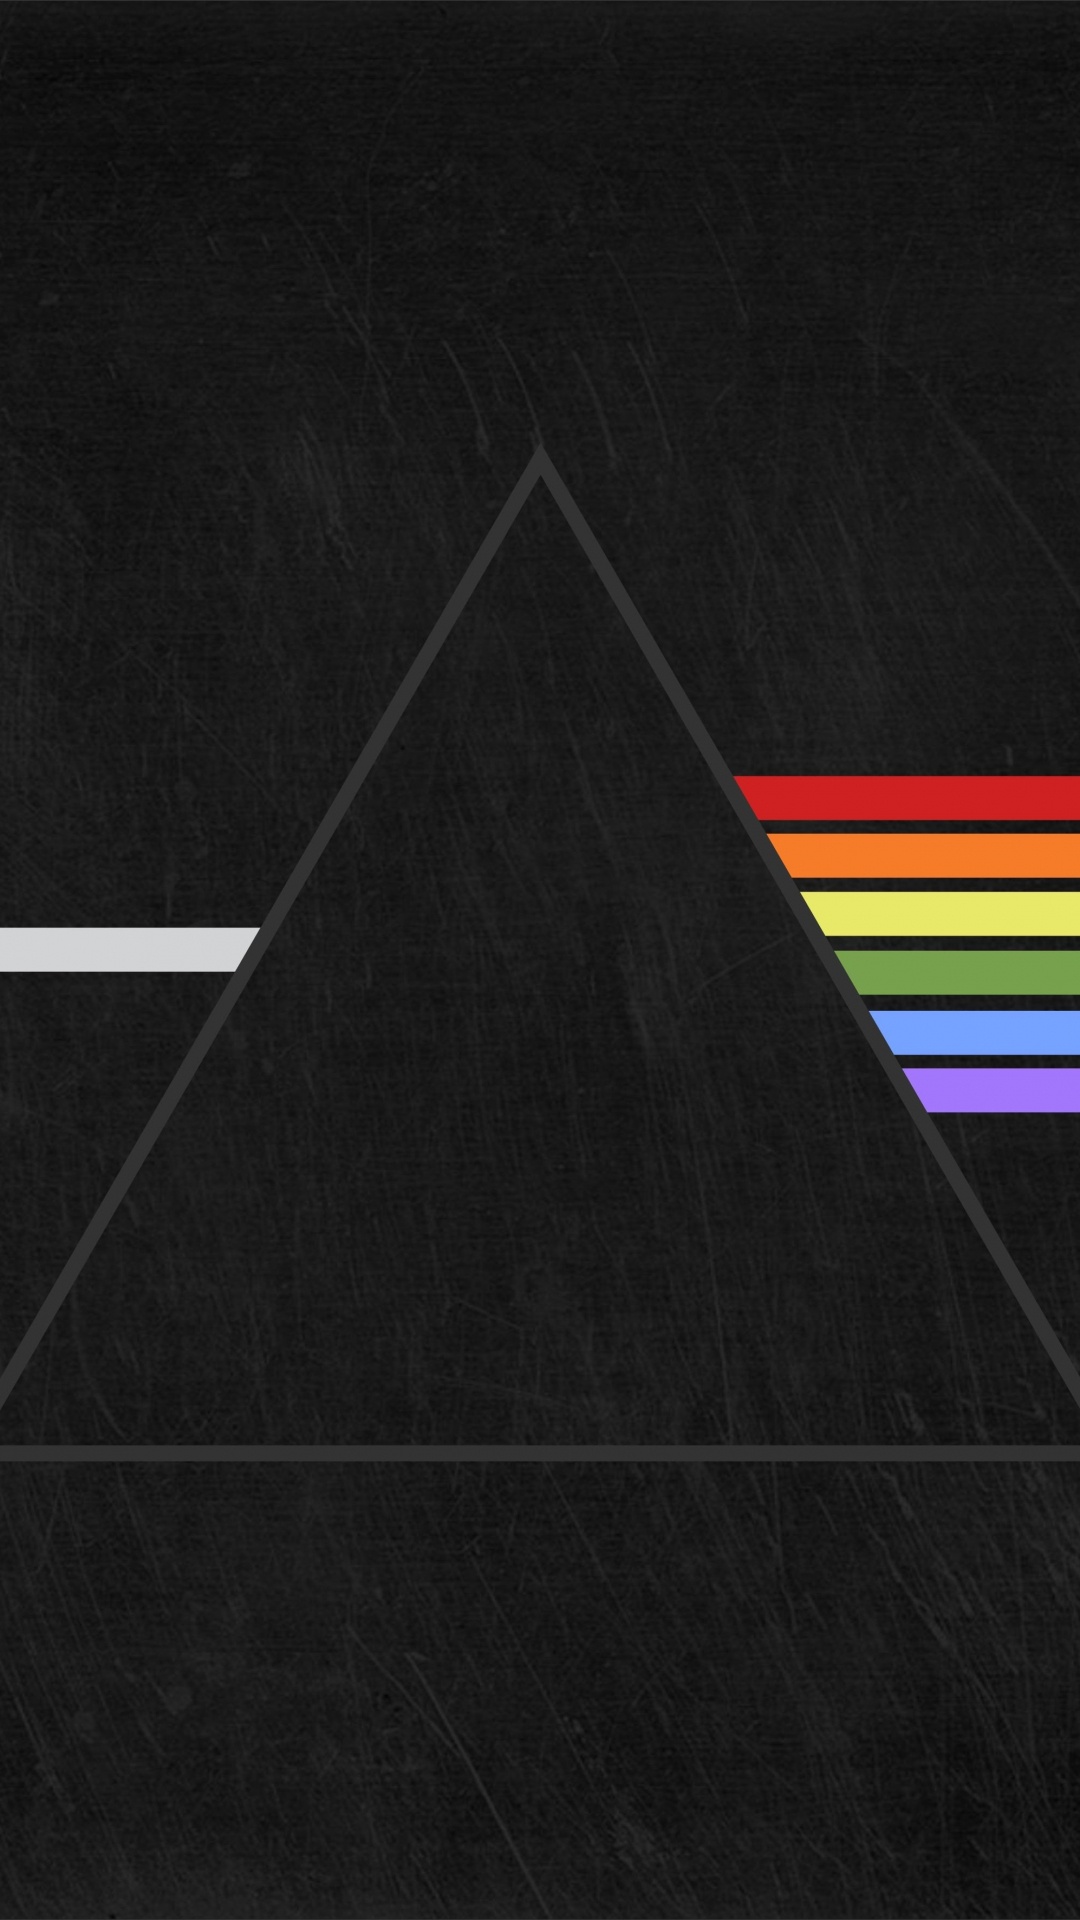 The Dark Side of The Moon, Pink Floyd, Prism, Black, Line. Wallpaper in 1080x1920 Resolution